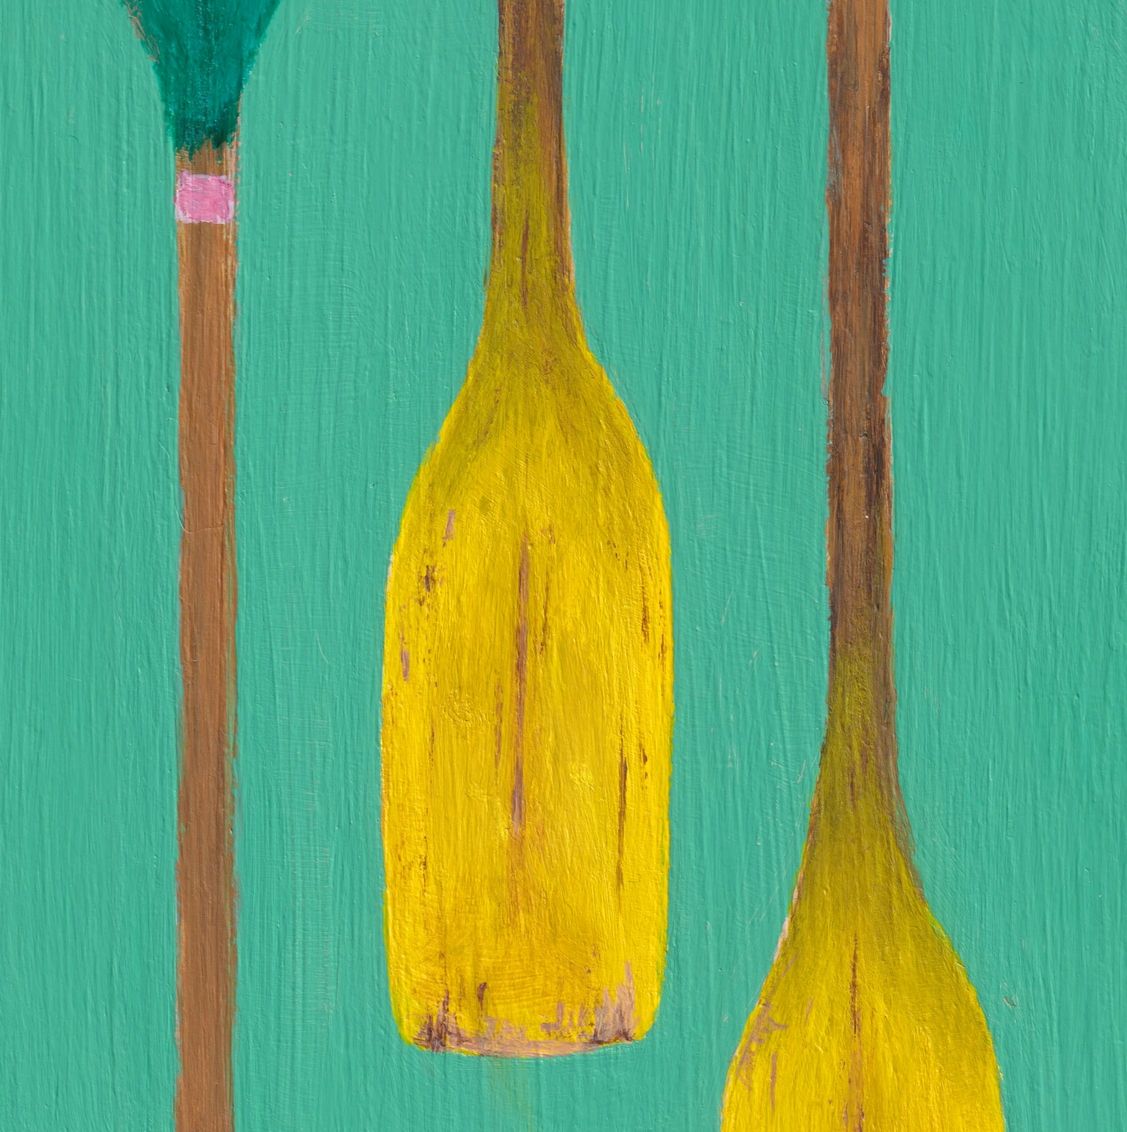 Oars, #4© Painting by Darlene G. 3 pair of old wood oars, green yellow and blue, on teal background